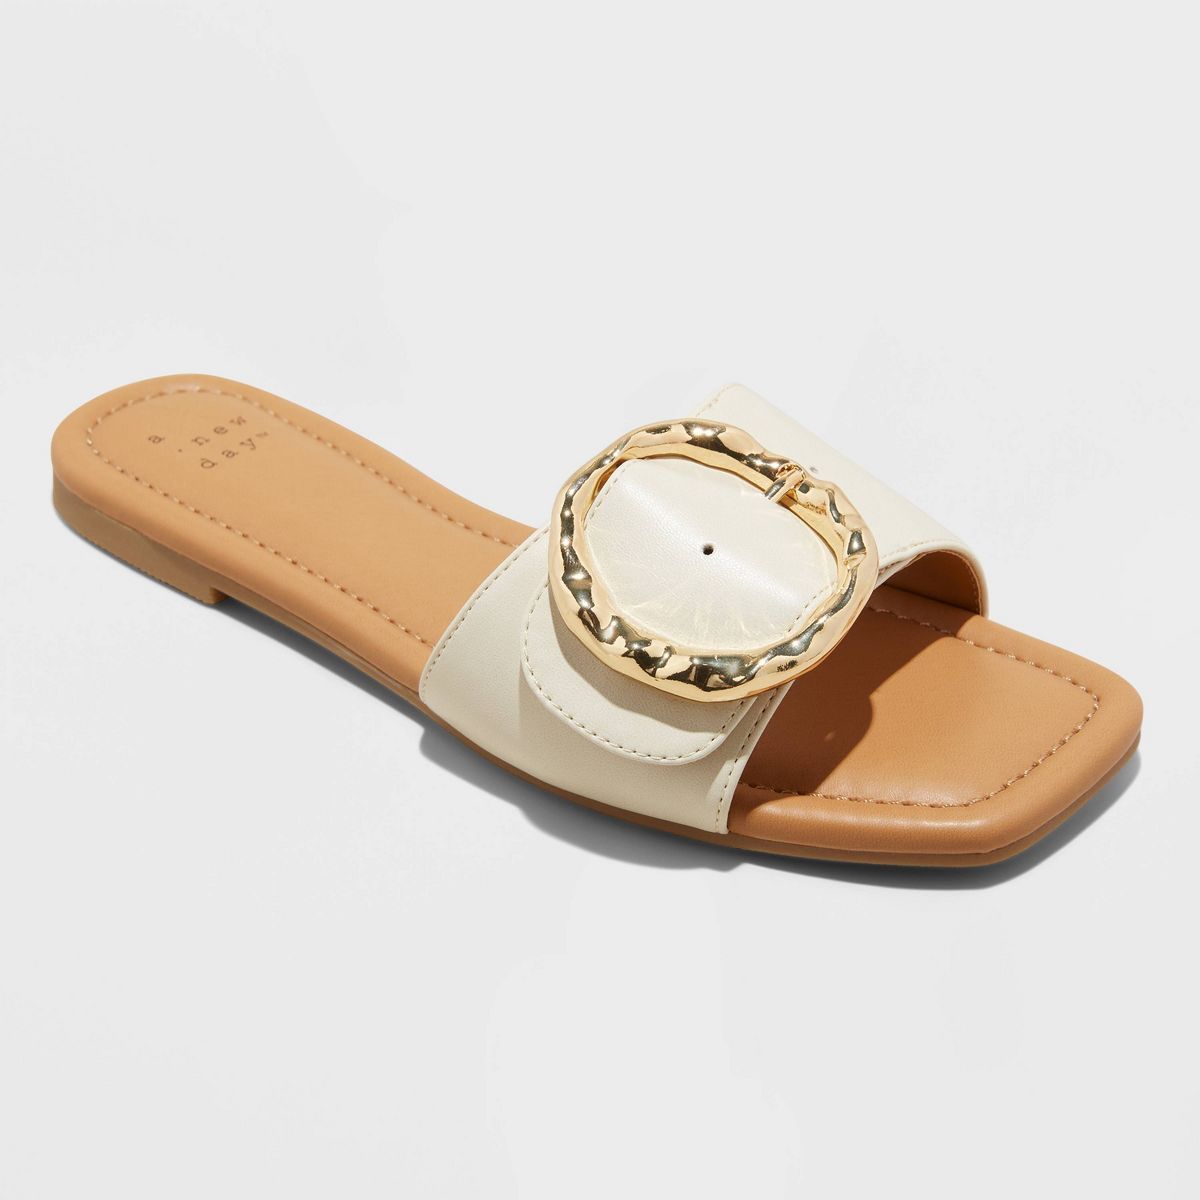 Women's Bennie Buckle Slide Sandals with Memory Foam Insole - A New Day™ Cream 5.5 | Target